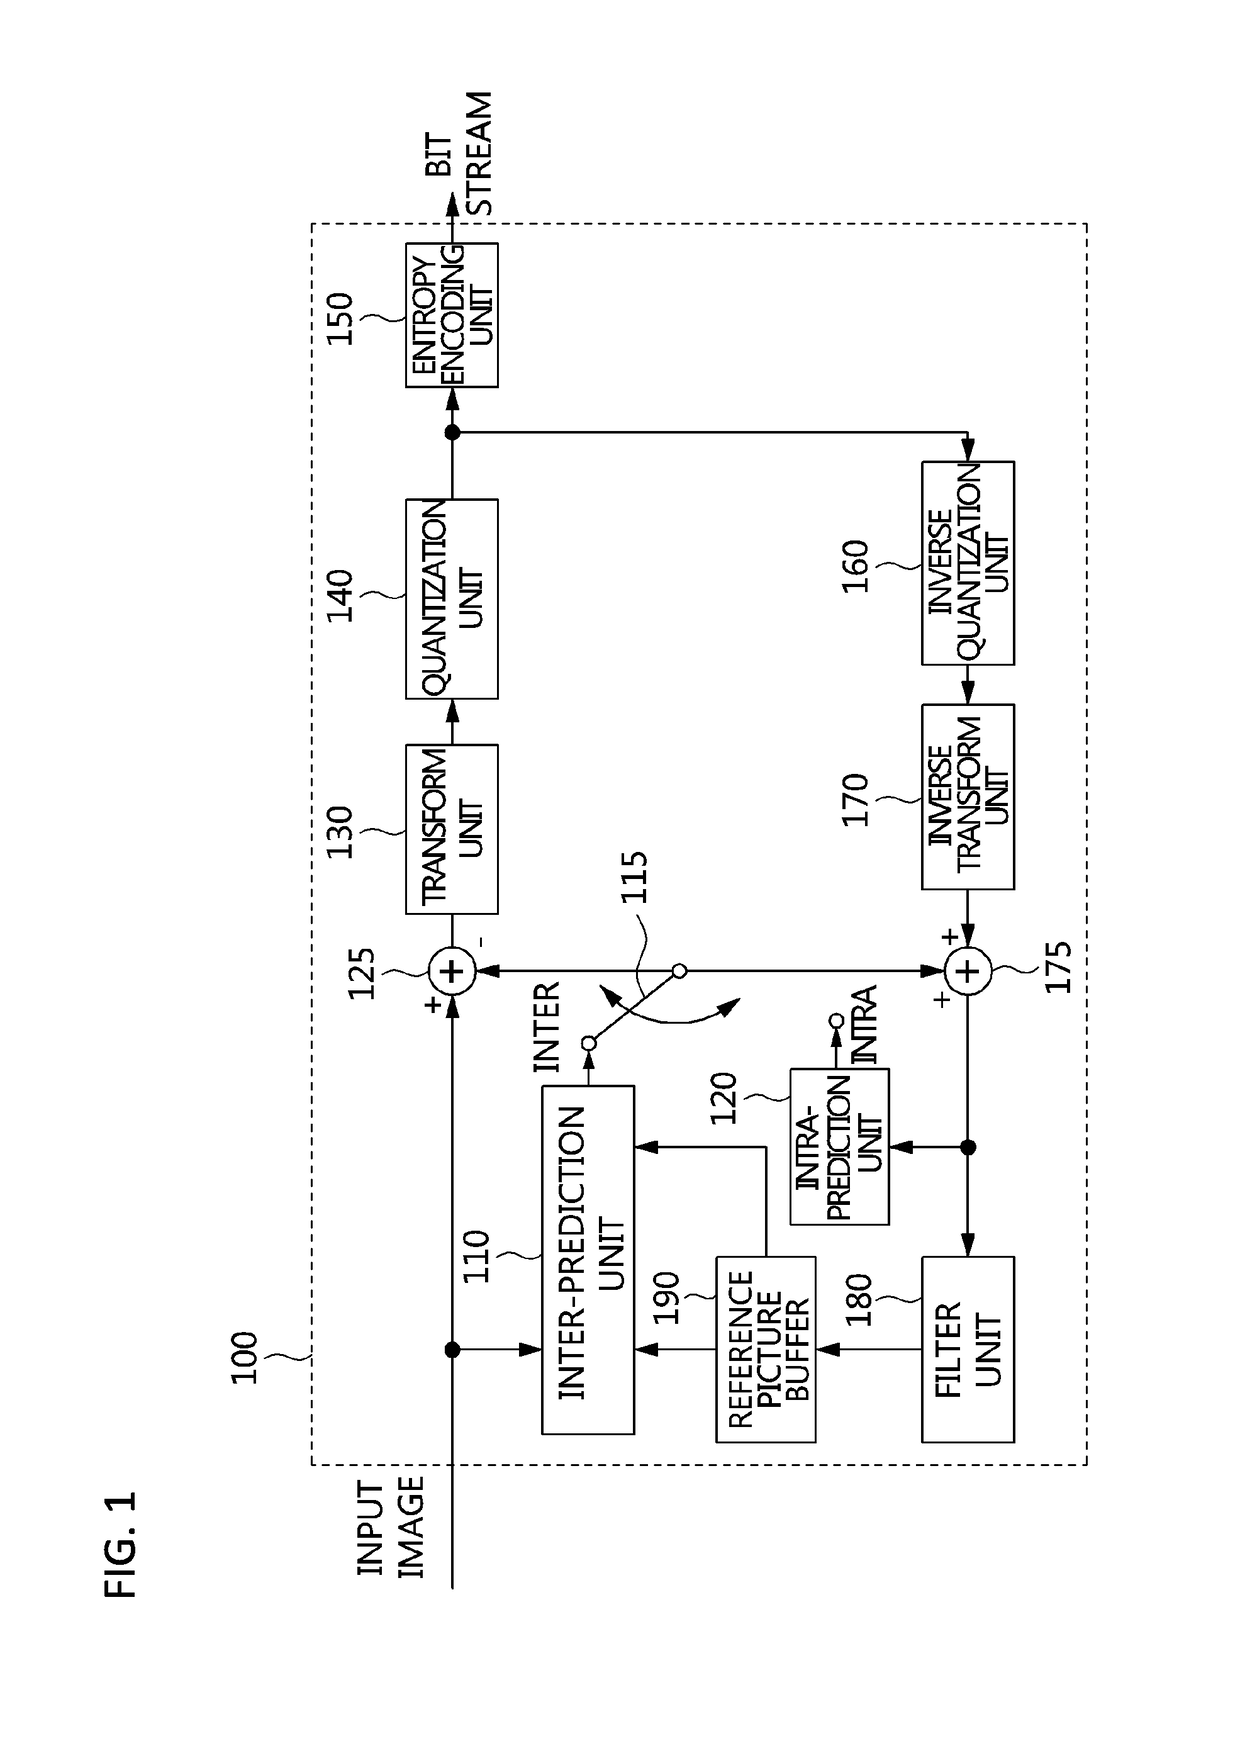 Method and apparatus for adaptive encoding and decoding based on image quality